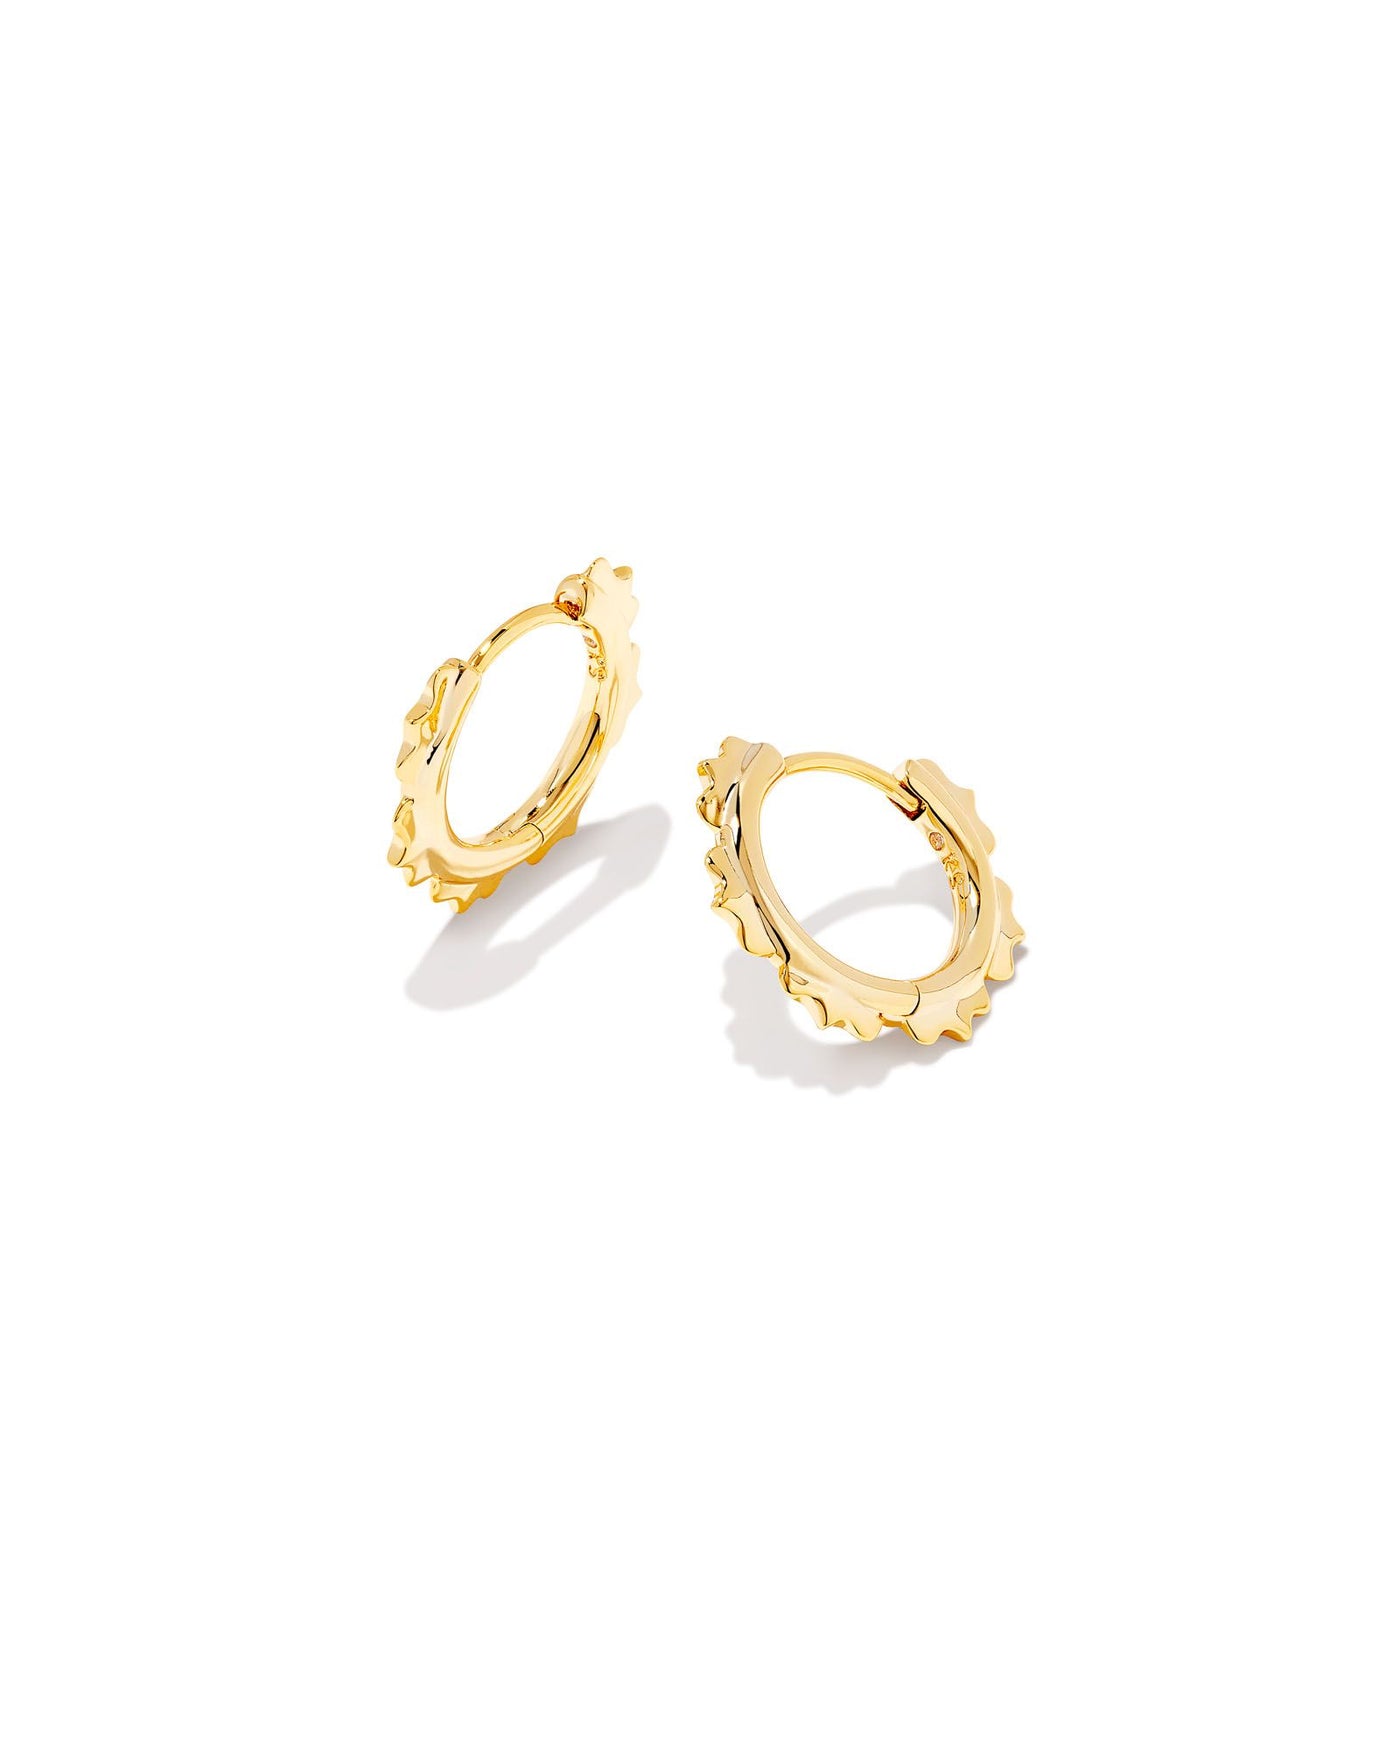 Kendra Scott Genevieve Huggie Earrings Gold-Earrings-Kendra Scott-Market Street Nest, Fashionable Clothing, Shoes and Home Décor Located in Mabank, TX